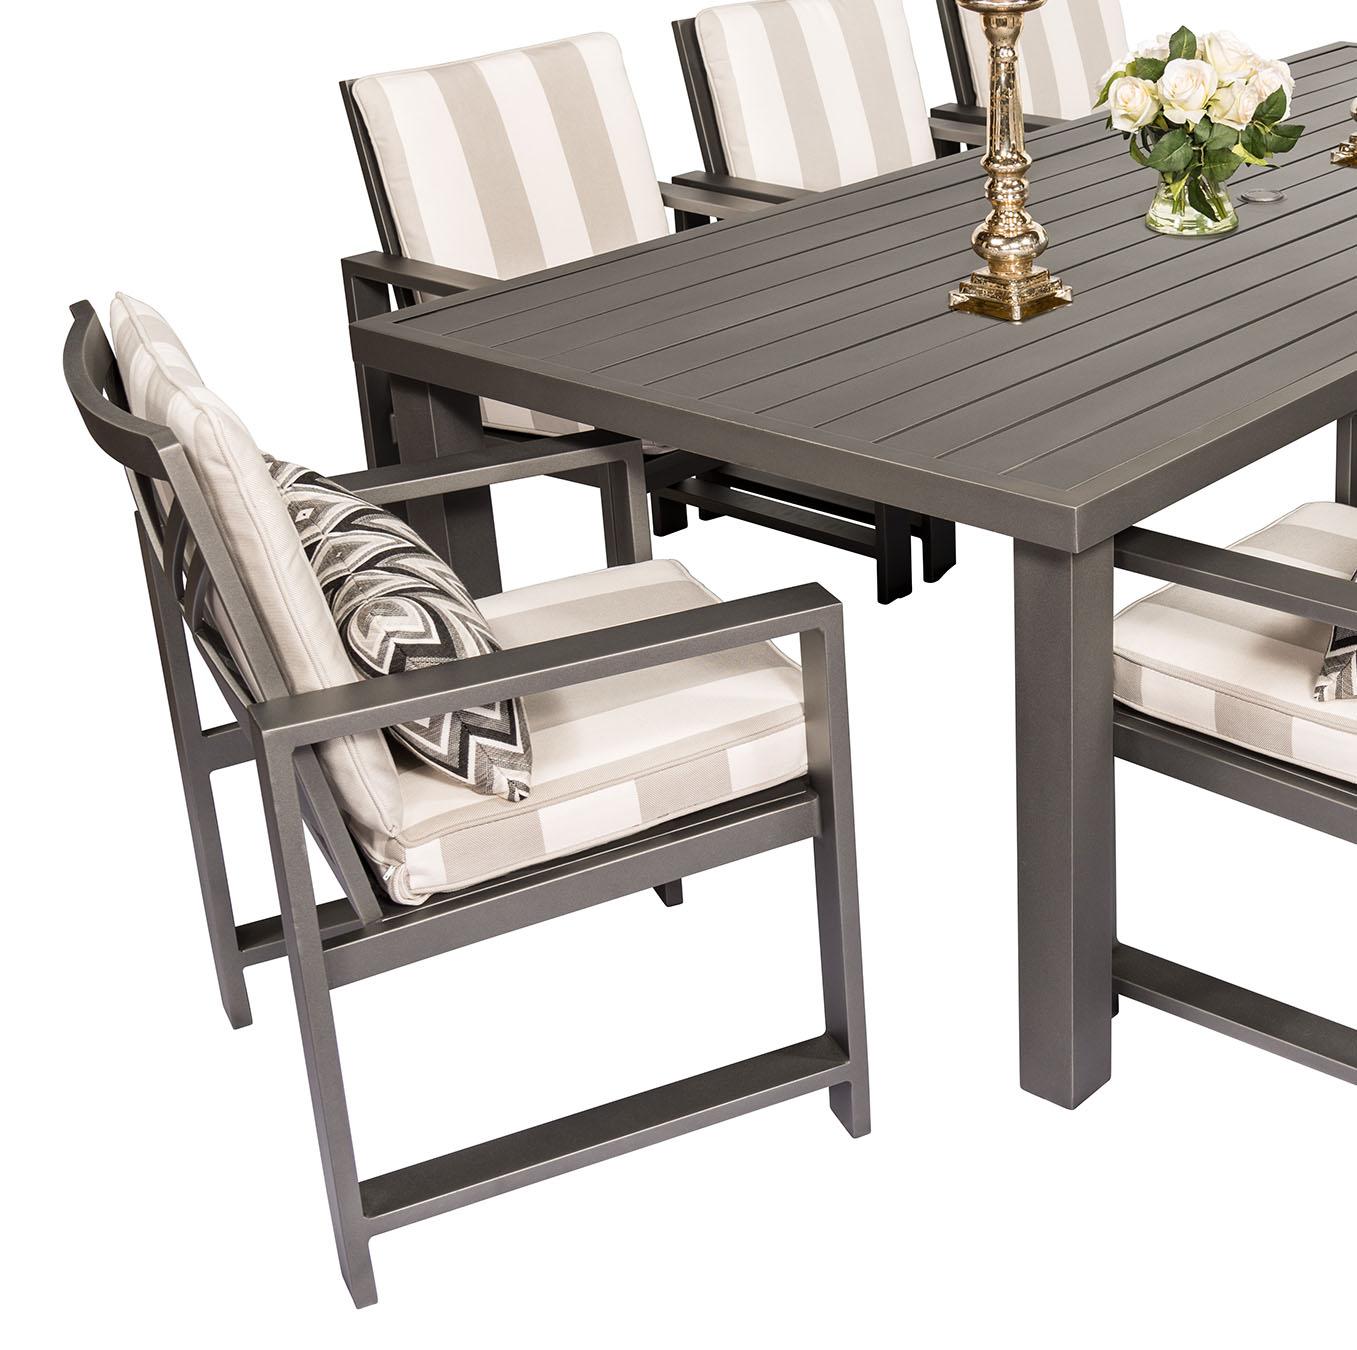 

    
CaliPatio Jolee Outdoor Dining Table Gray RCTDT9644JL
